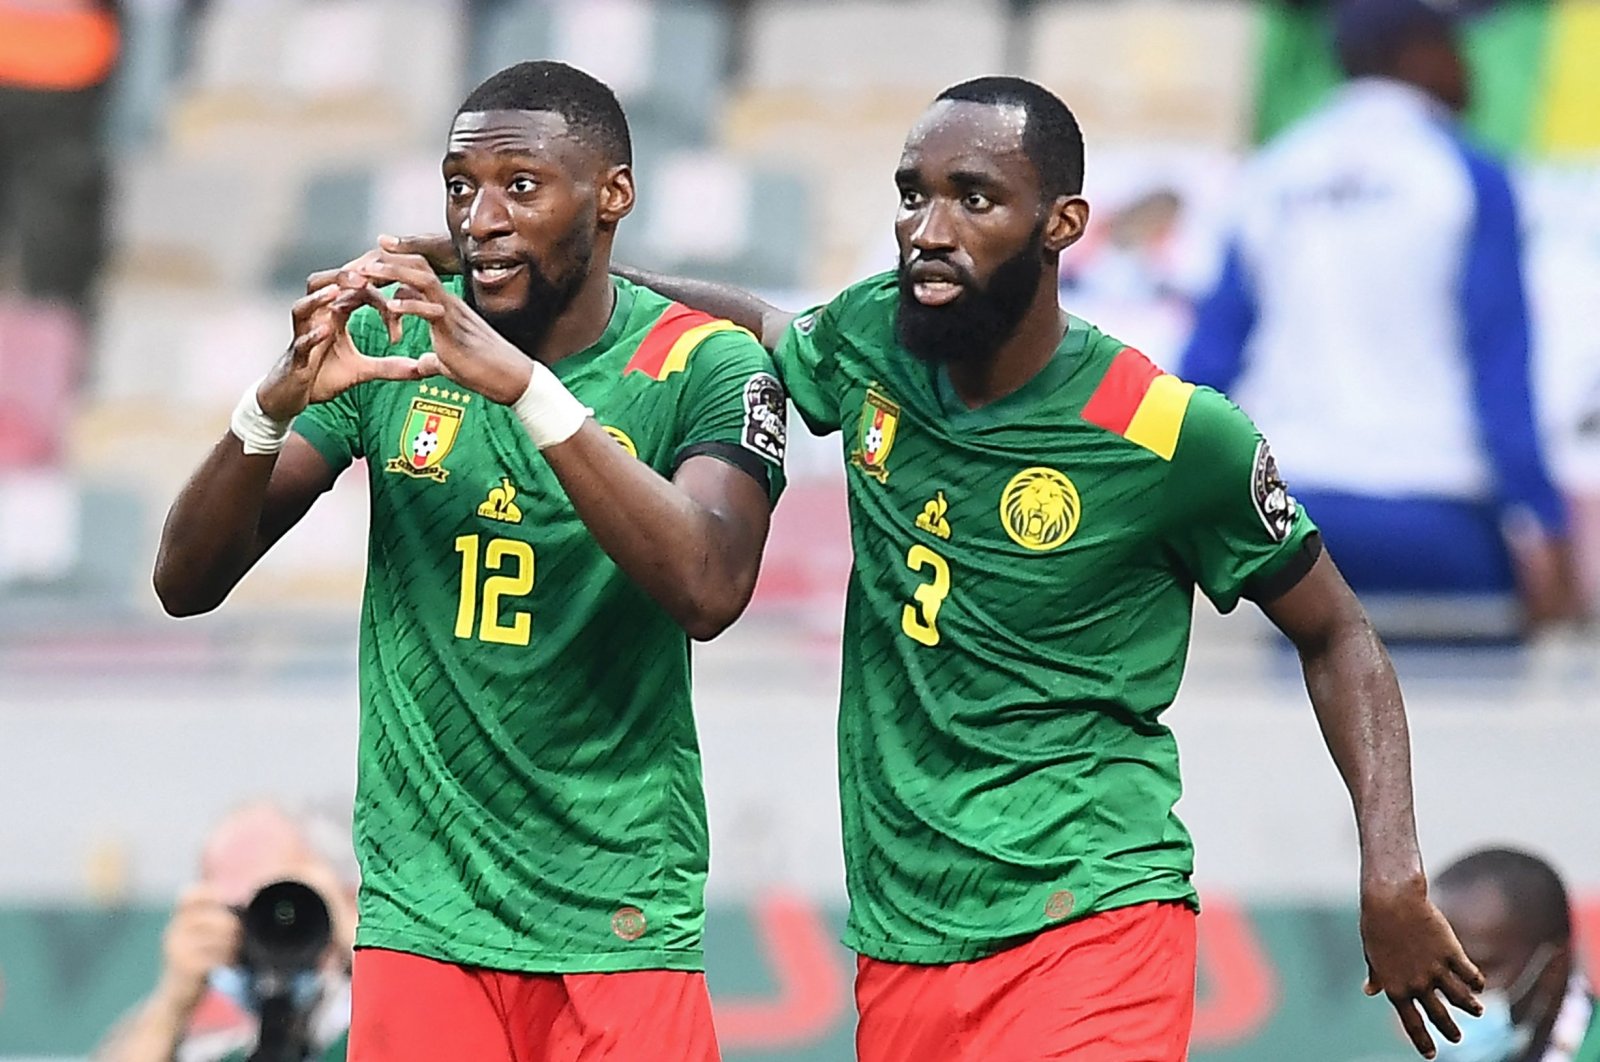 Cameroon forward Karl Toko Ekambi (L) celebrates with teammate Moumi Ngamaleu after scoring his team&#039;s first goal during the AFCON quarterfinal match against Gambia, Douala, Cameroon, Jan. 29, 2022. (AFP Photo)